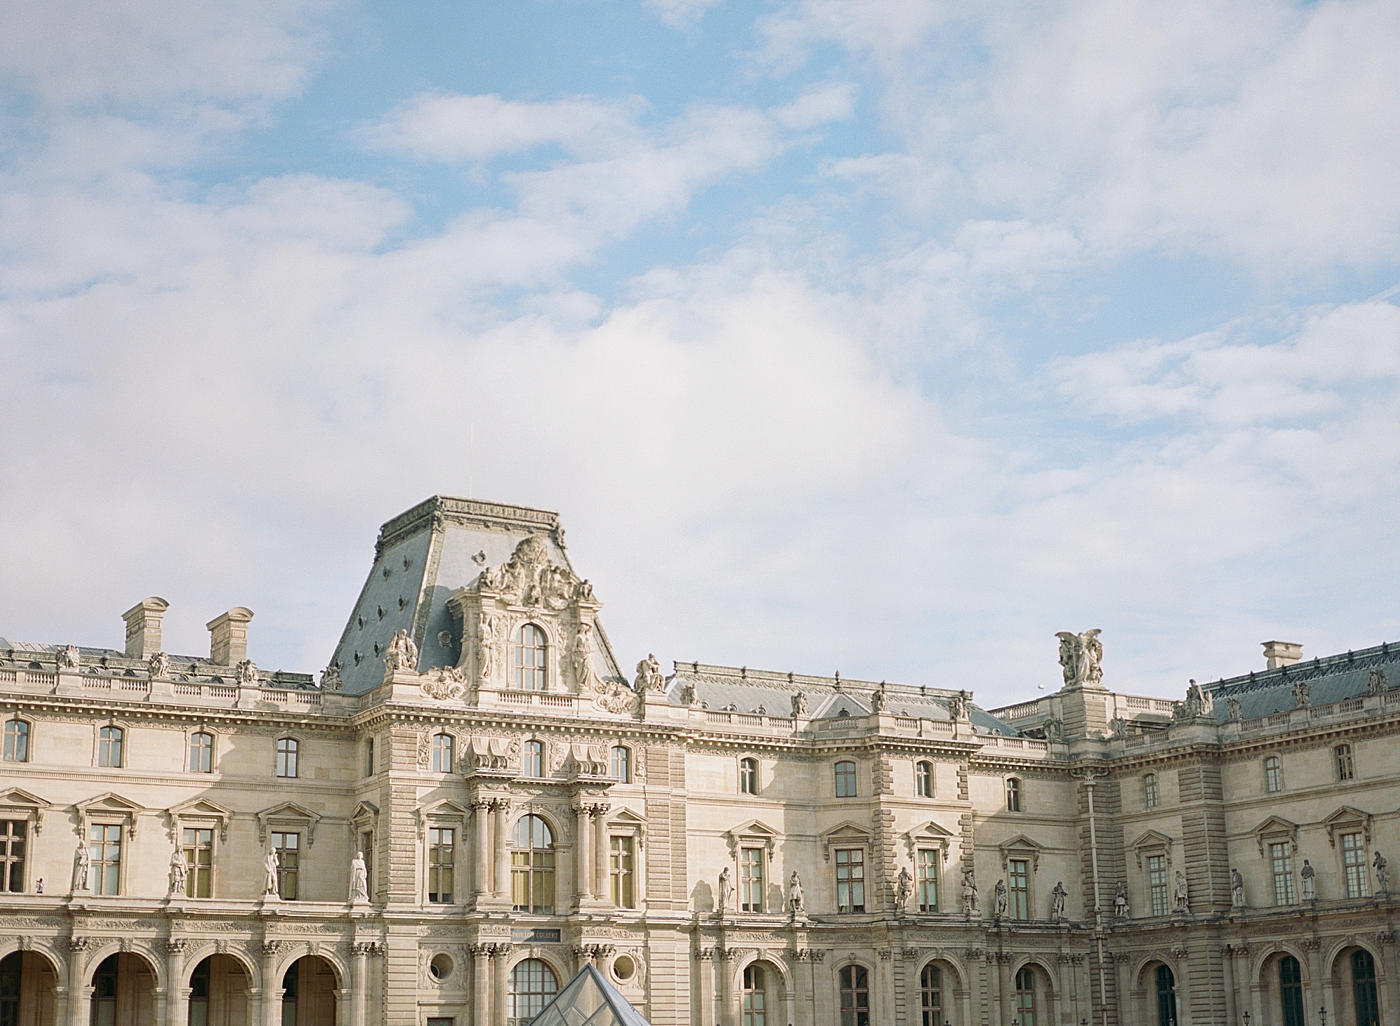 Location image of the Louvre during Paris Elopement | Image by Hope Helmuth Photography